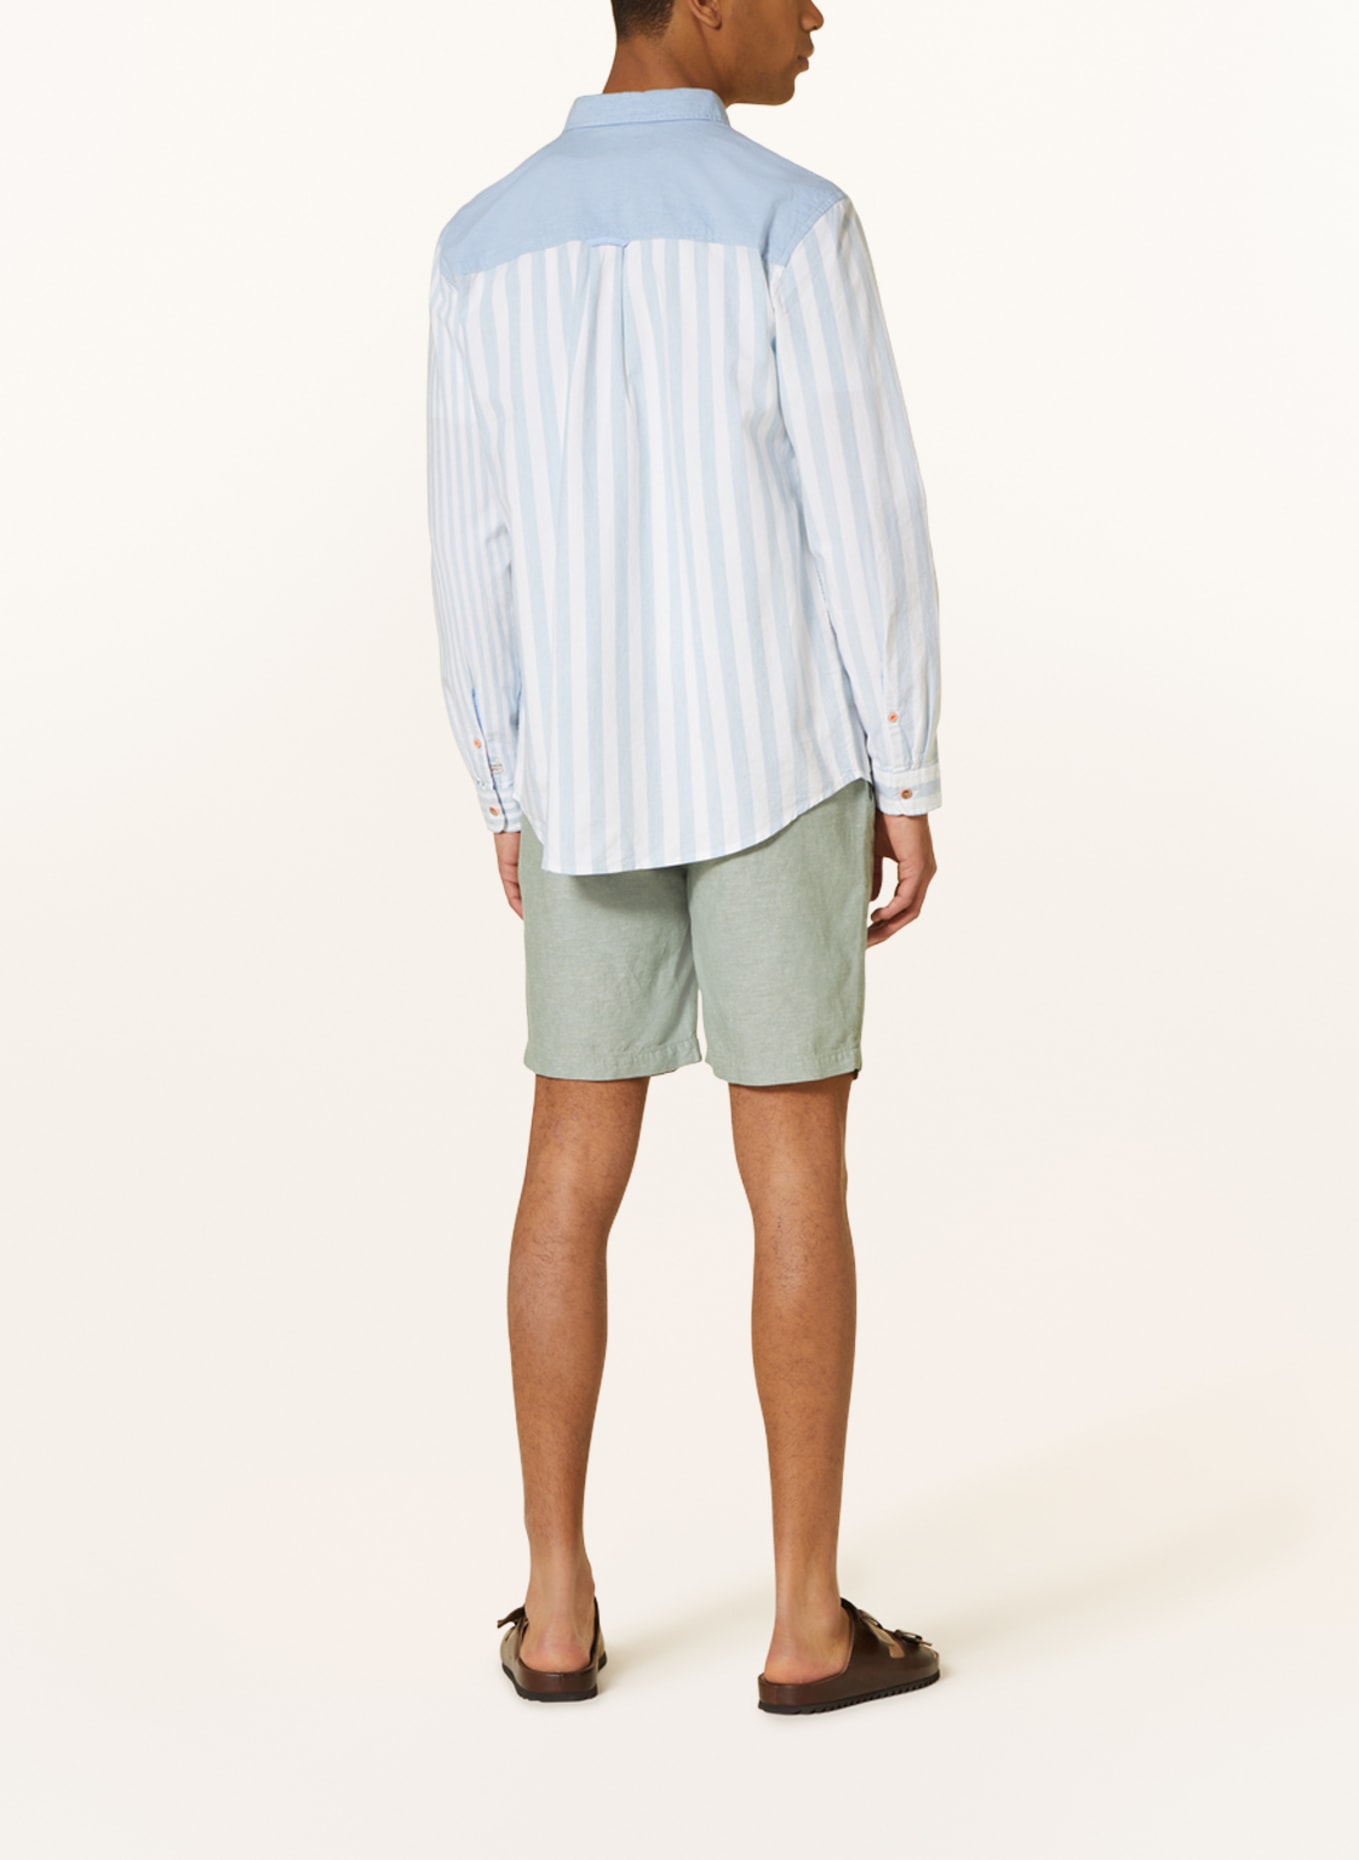 SCOTCH & SODA Shirt relaxed fit, Color: LIGHT BLUE/ WHITE (Image 3)